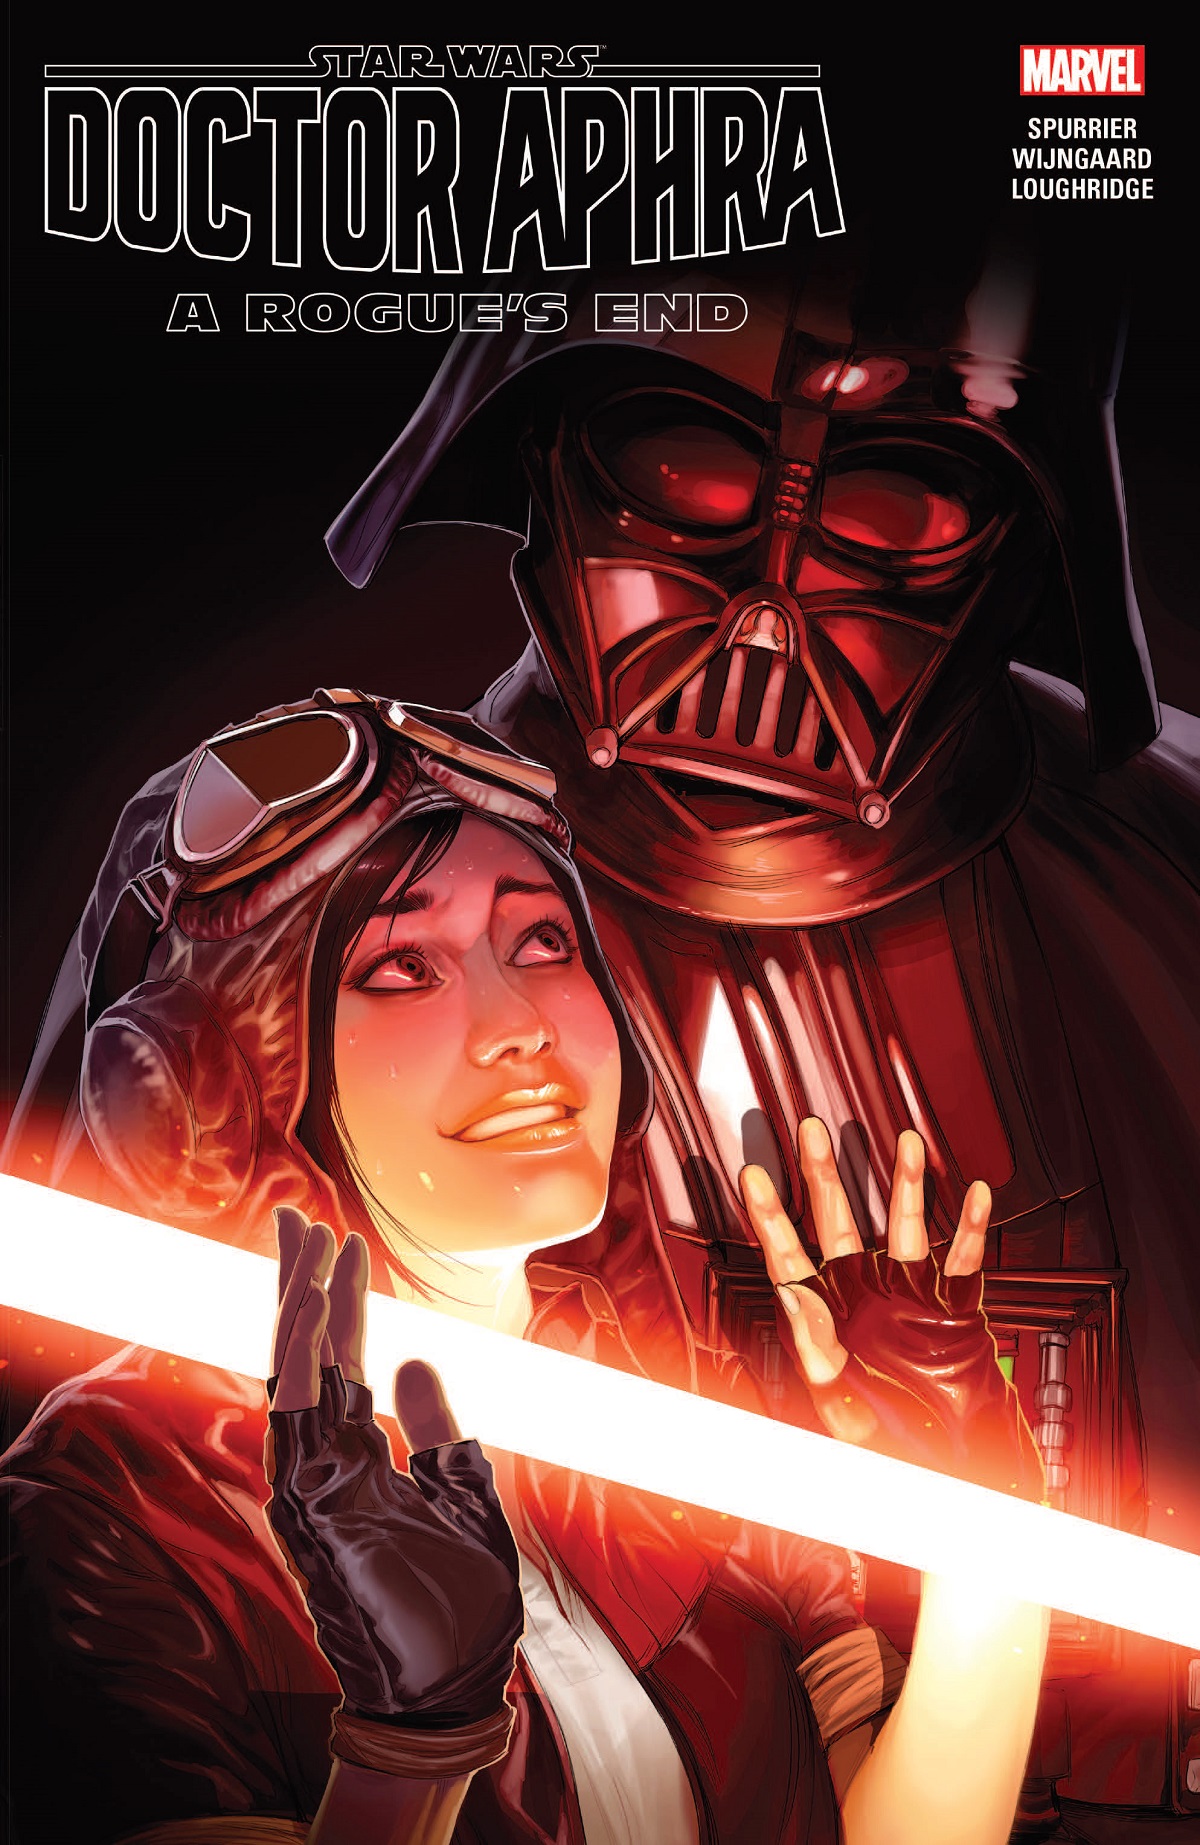 Star Wars: Doctor Aphra Vol. 7 - A Rogue's End (Trade Paperback)